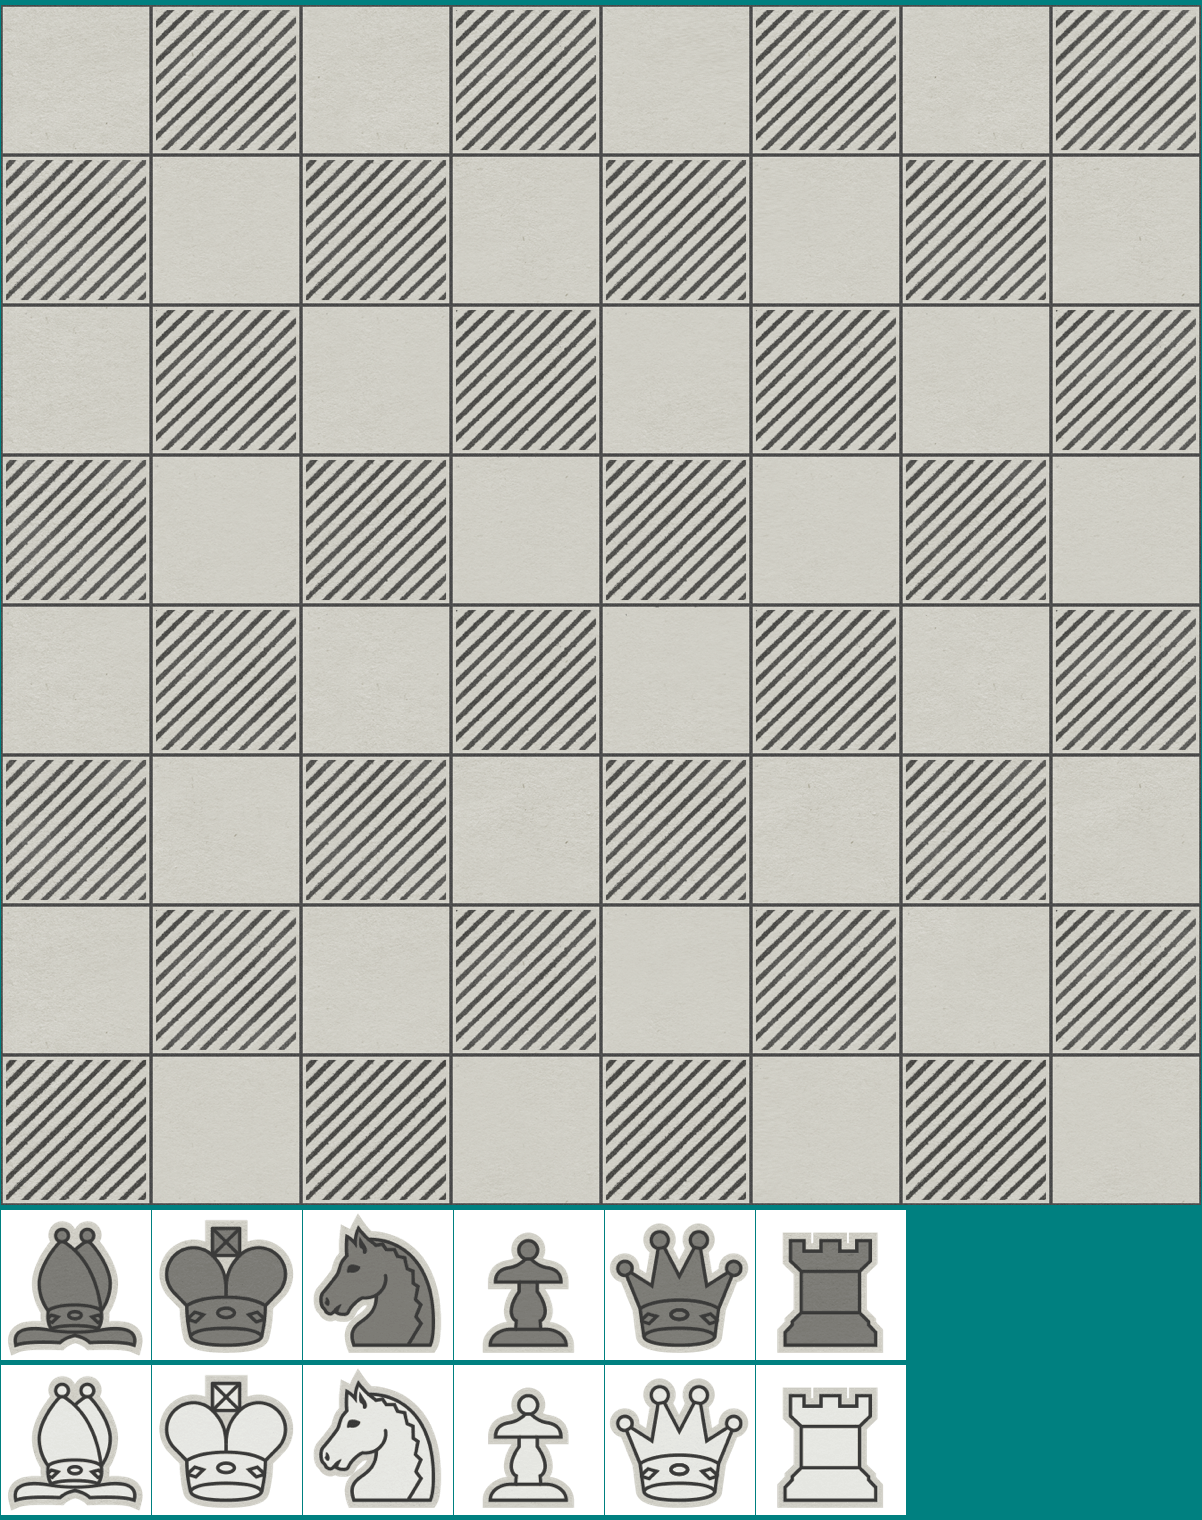 Board and Chess Pieces (Newspaper)